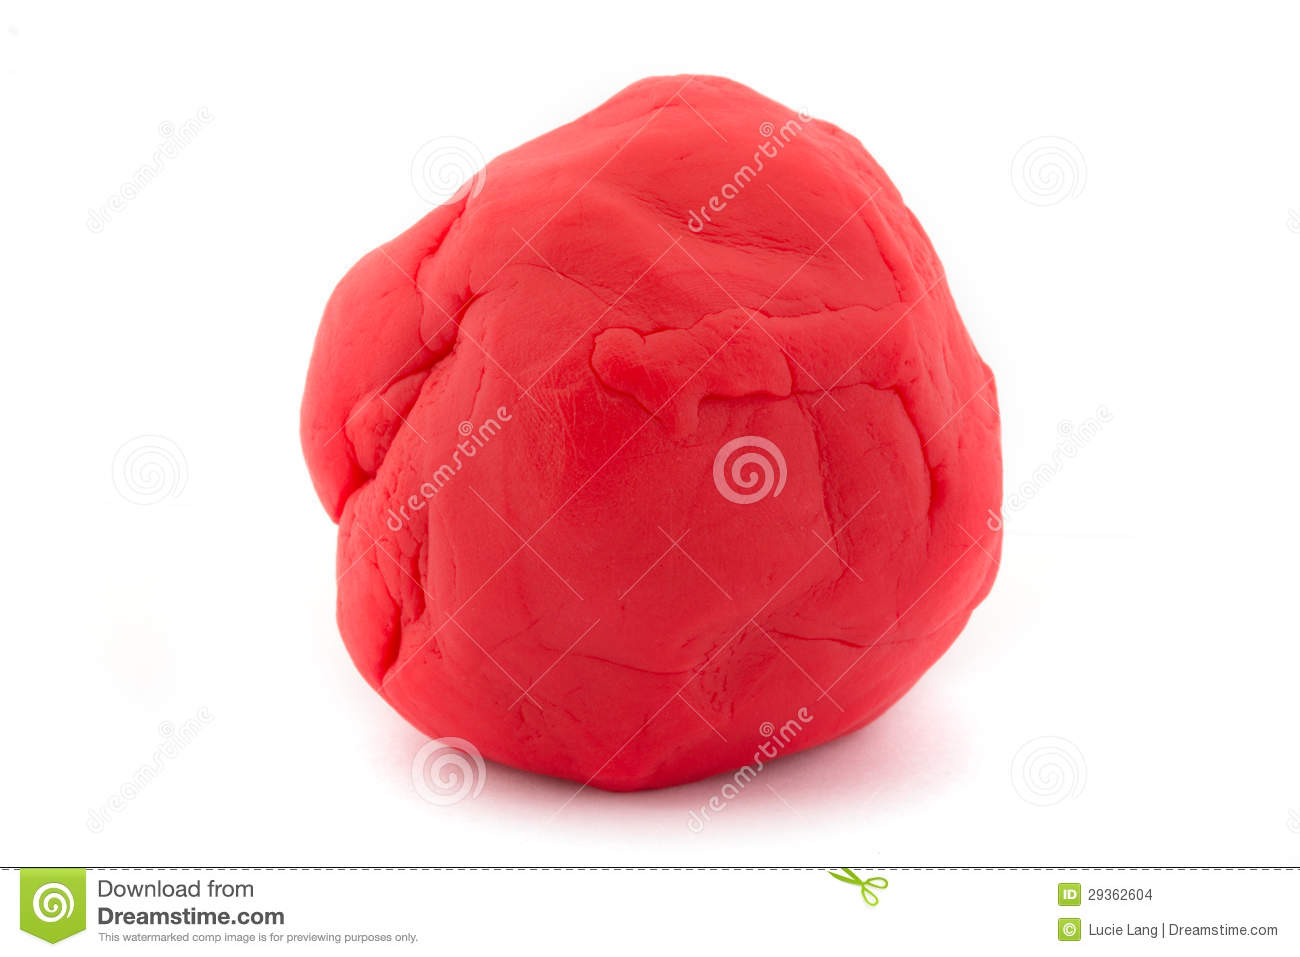 Ball Of Red Play Dough On White Stock Images   Image  29362604